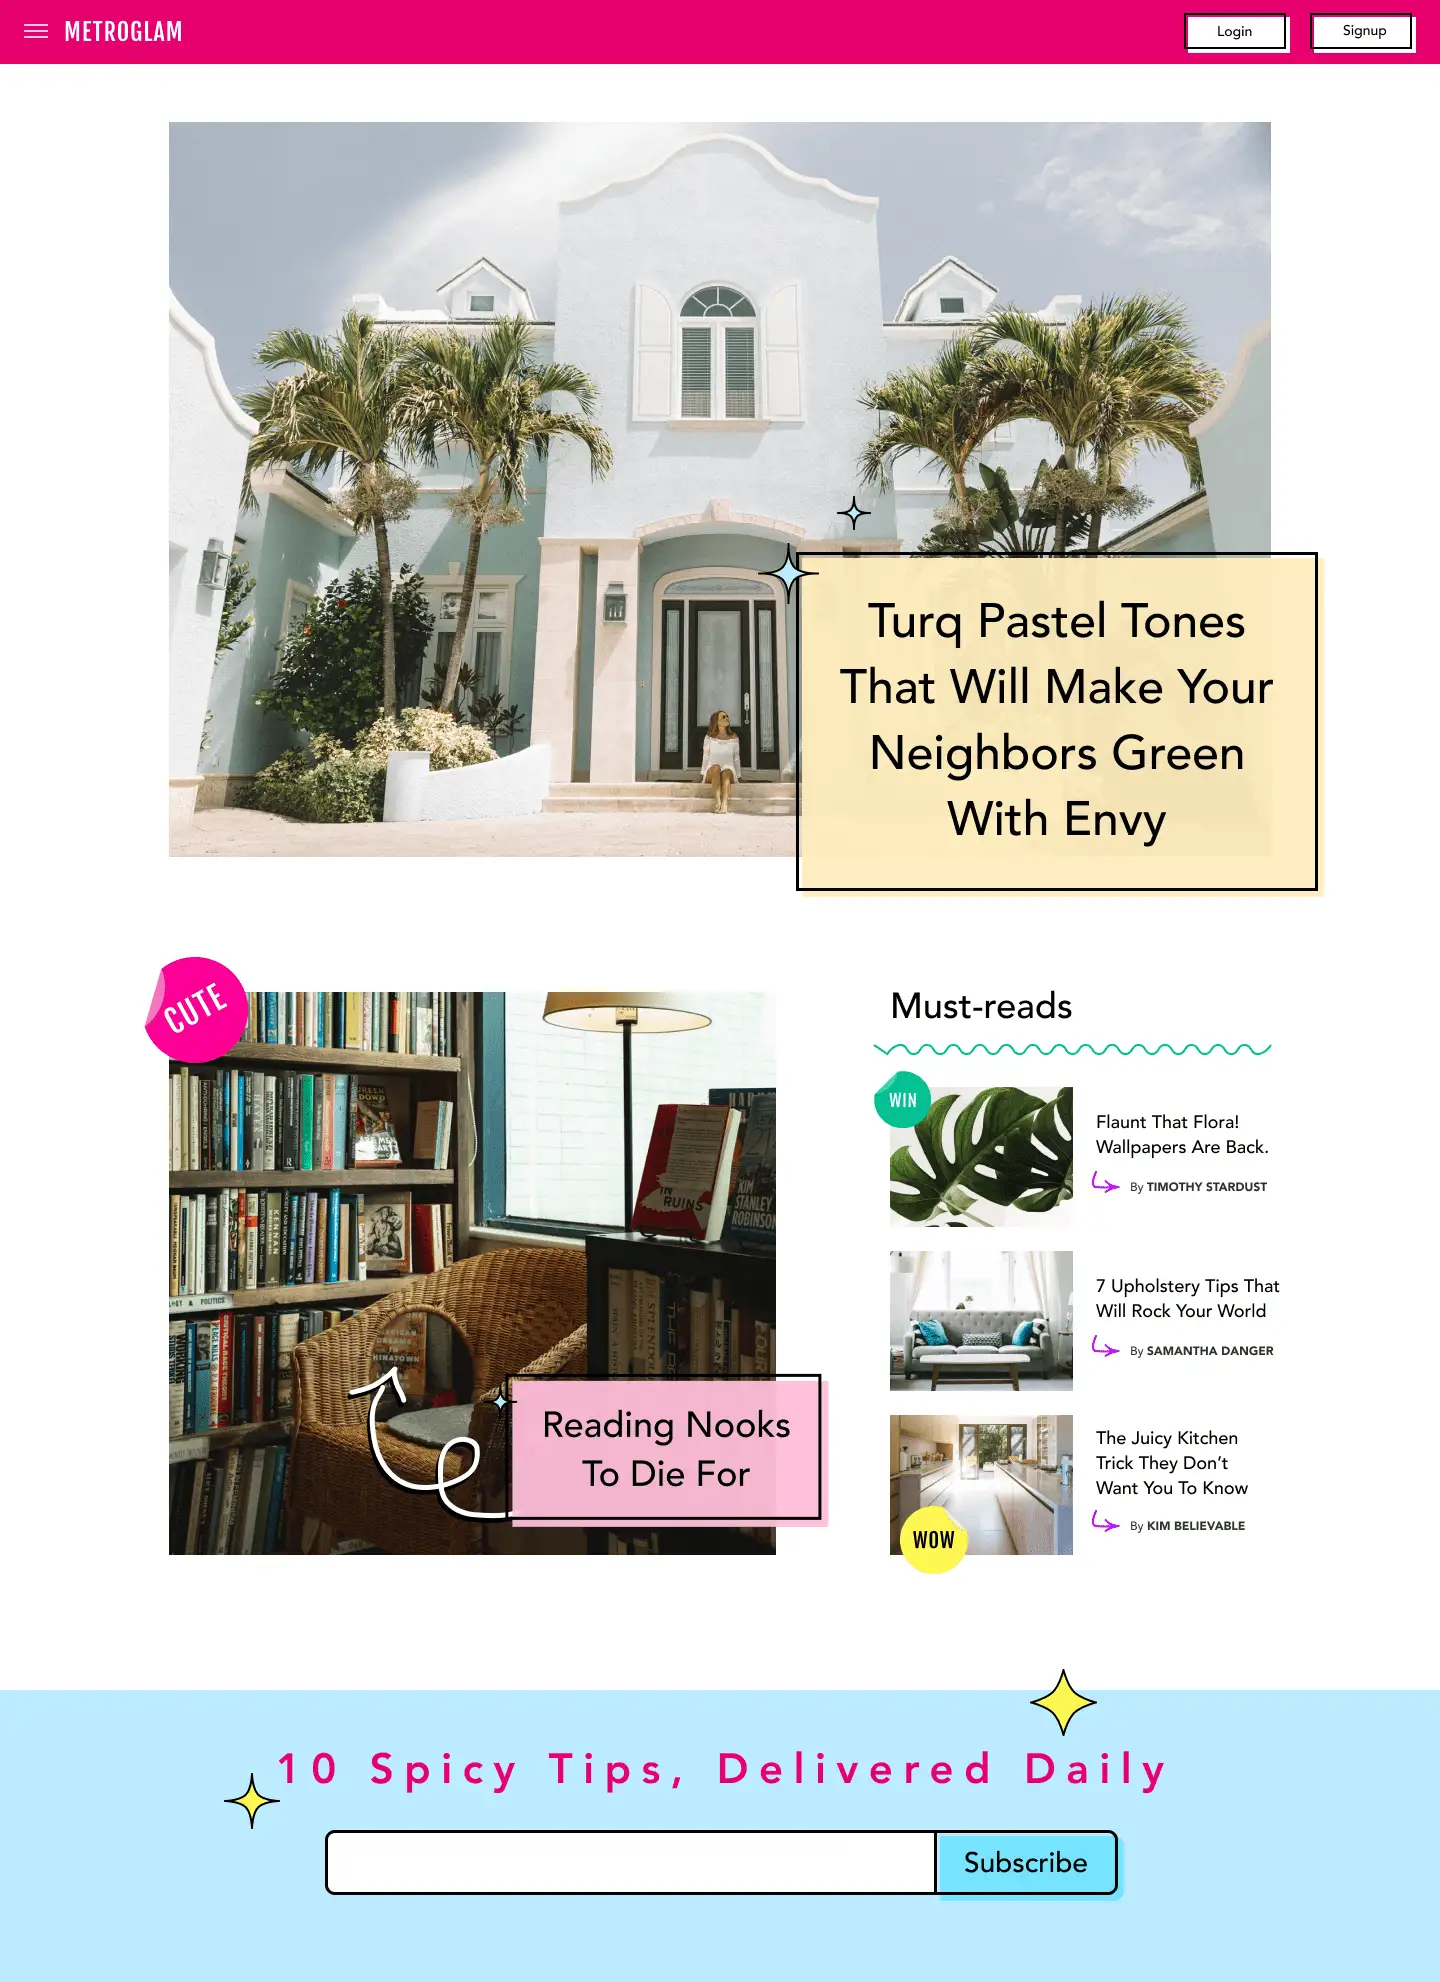 A mockup of a Cosmopolitan-style online magazine, except all the articles are about interior design and architecture